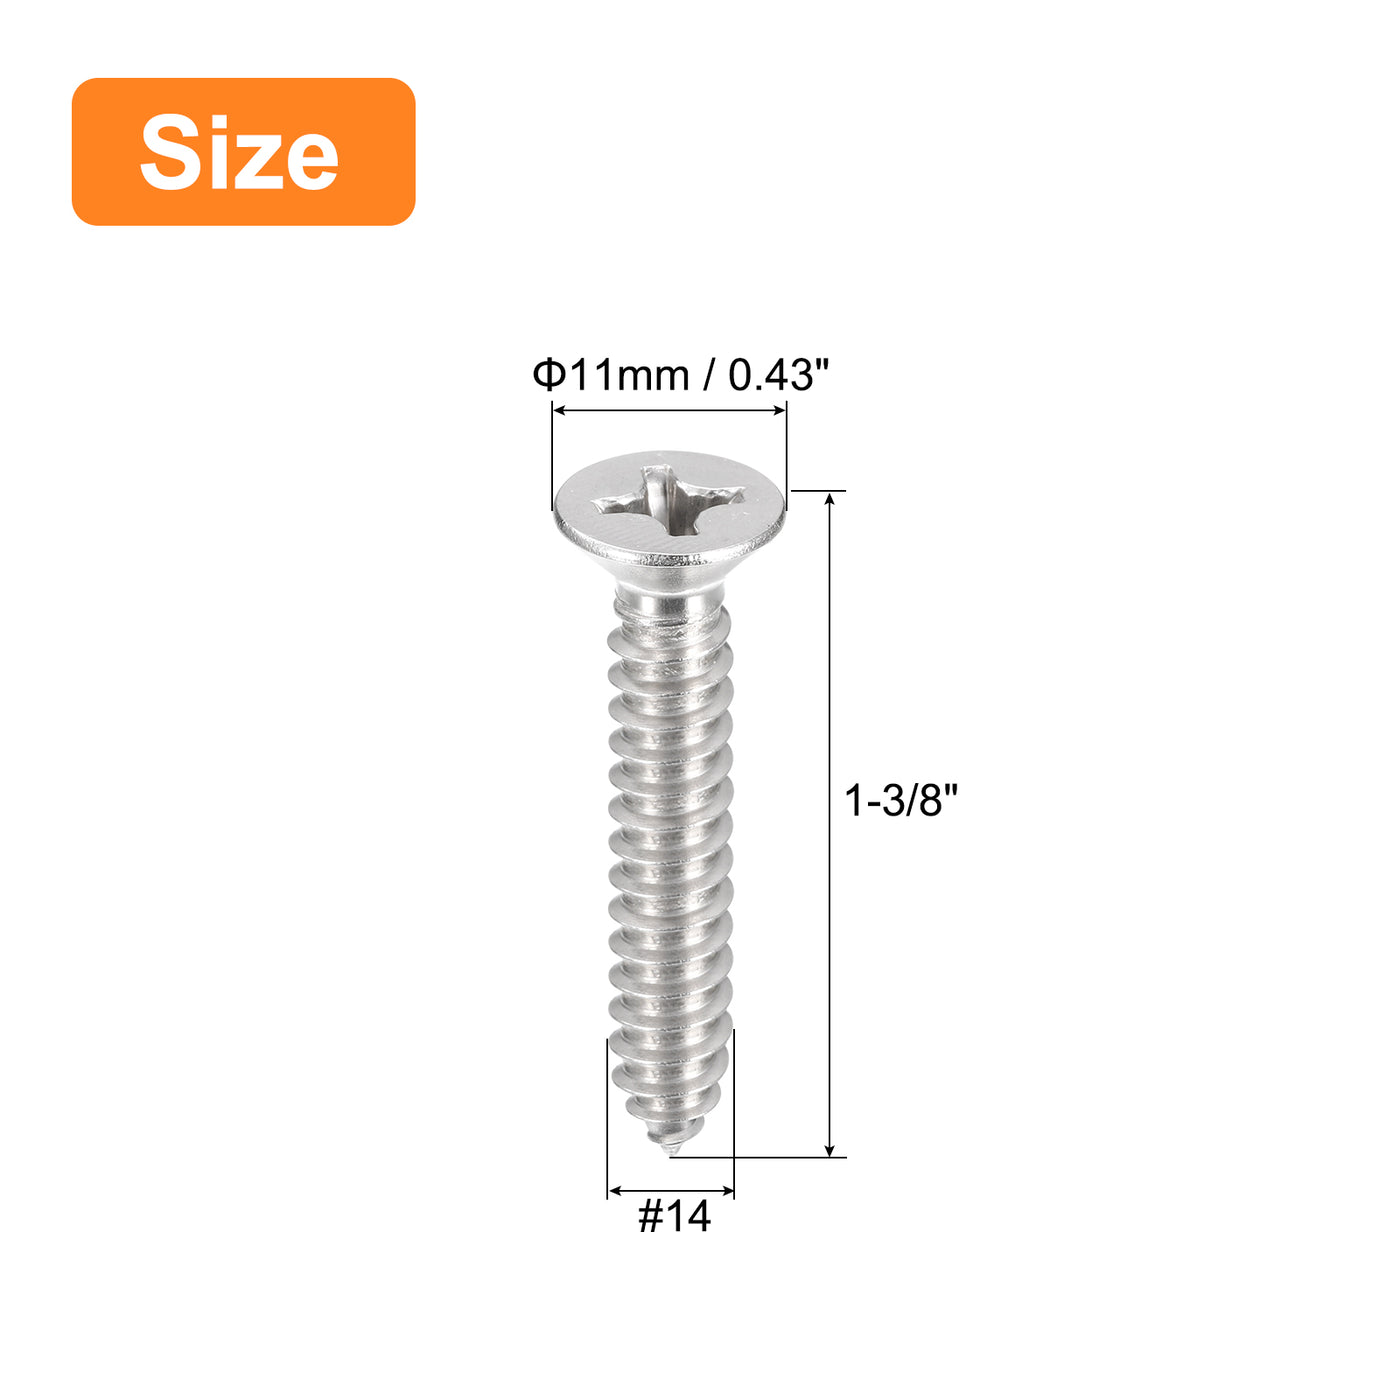 uxcell Uxcell #14x1-3/8" Wood Screws, 15pcs Phillips Self Tapping Screws 304 Stainless Steel